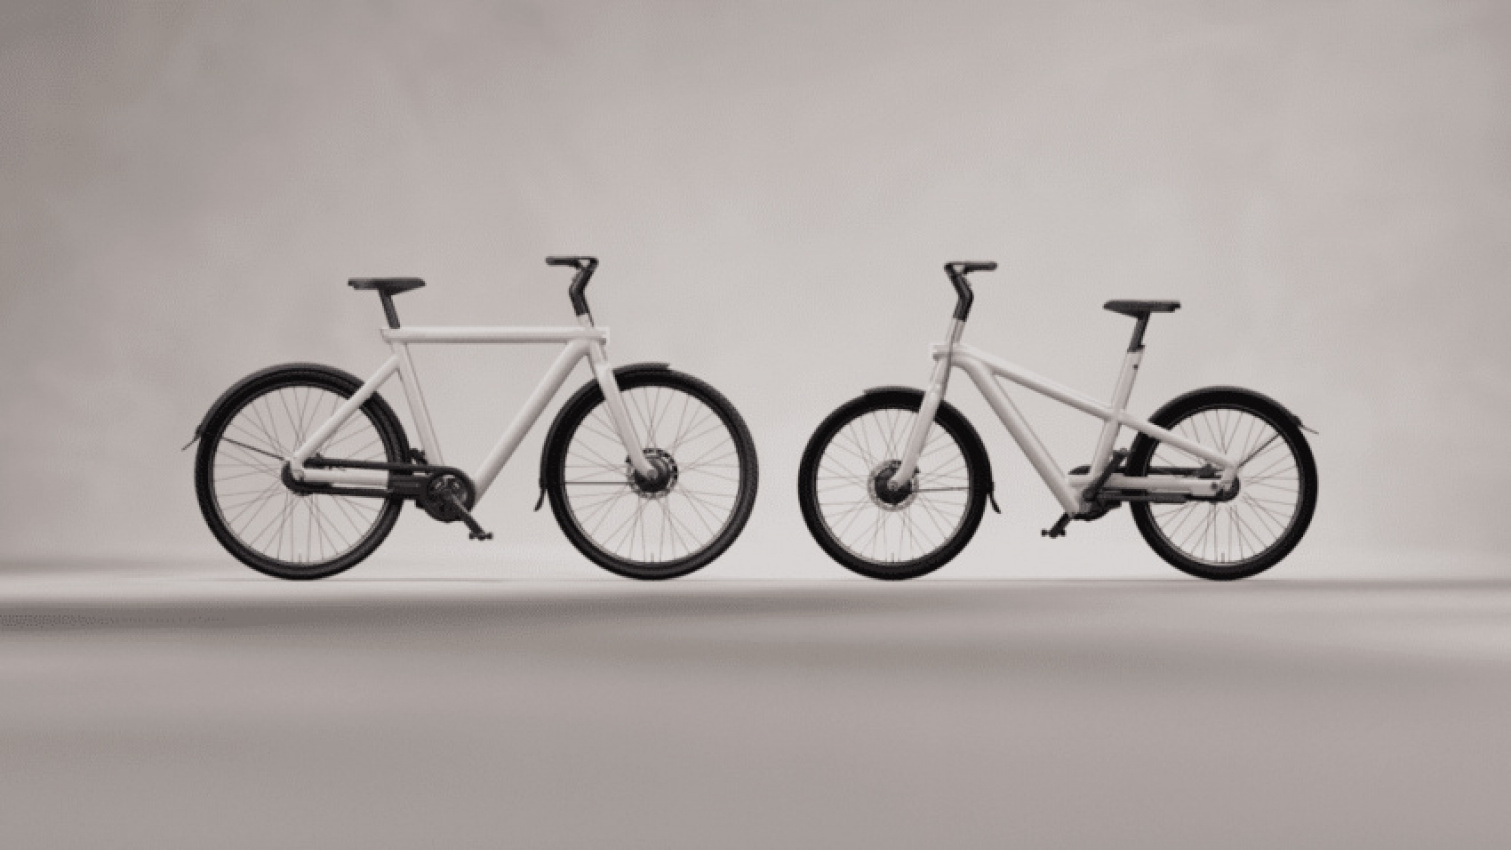 autos, cars, e-scooters & e-bikes, ram, technology, job stehmann, ties carlier, vanmoof, vanmoof s5, vanmoof reveals its next generation e-bikes with step-in frame